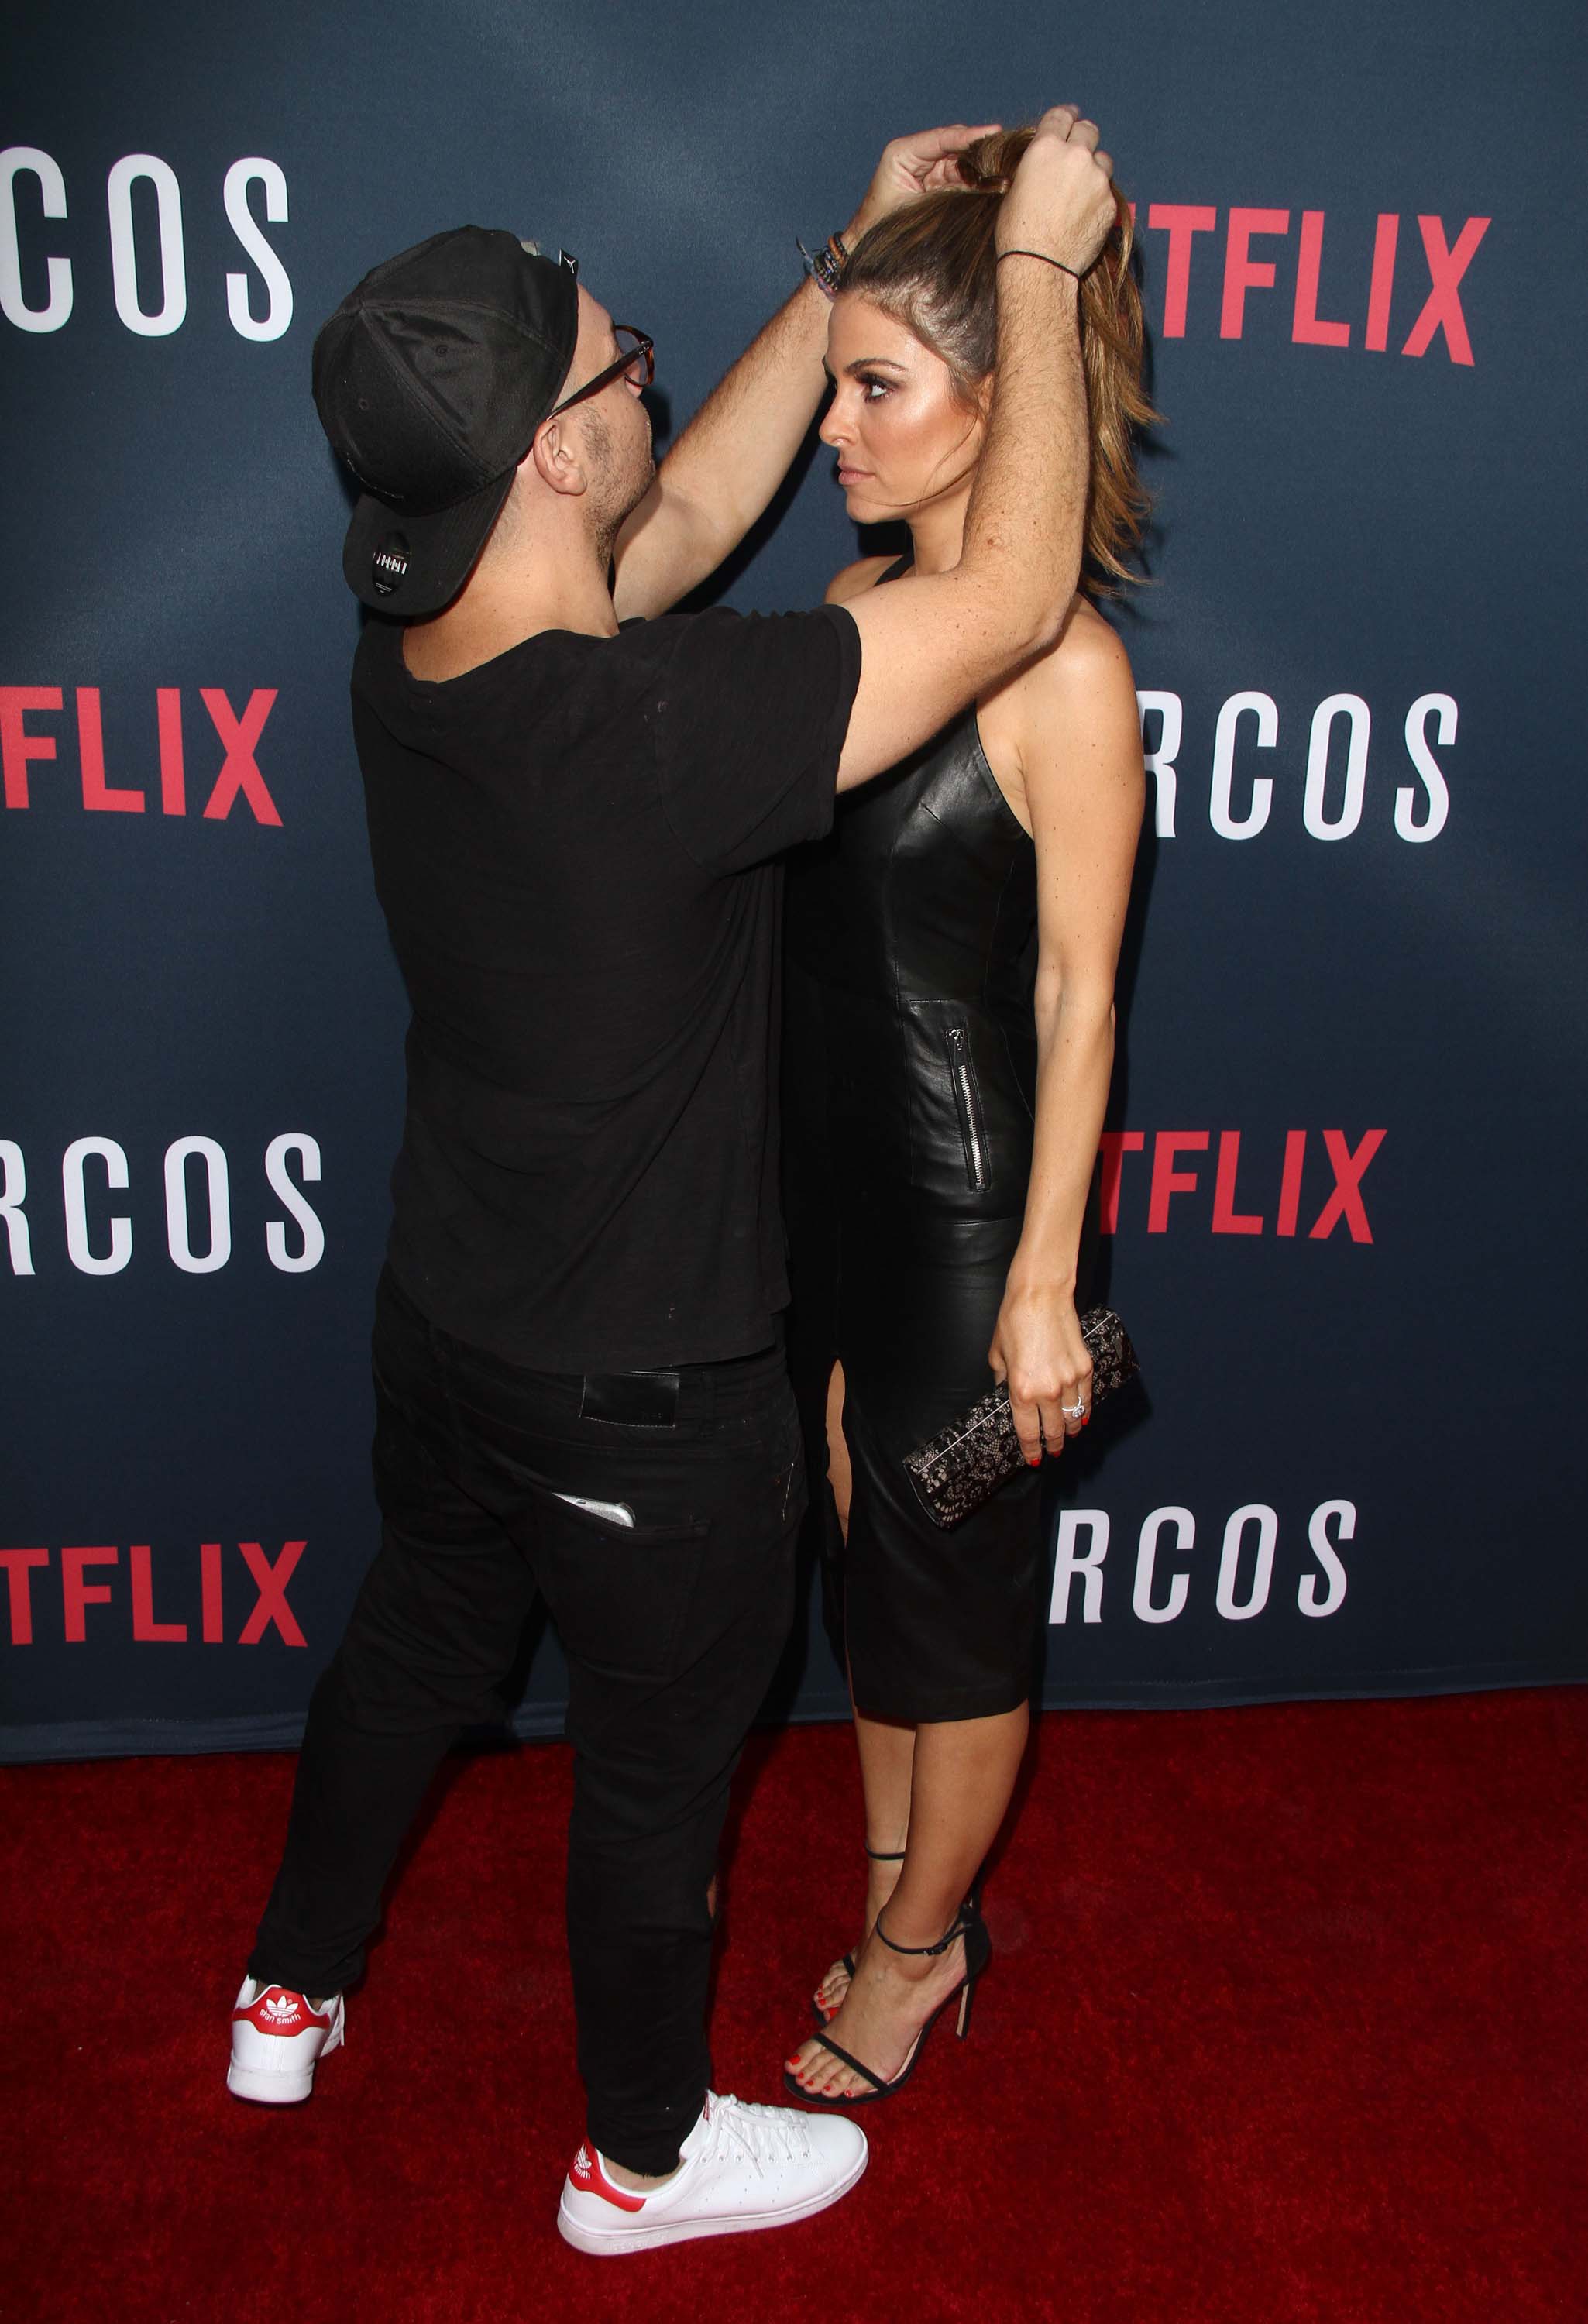 Maria Menounos attends the Season 2 premiere of Netflix’s Narcos